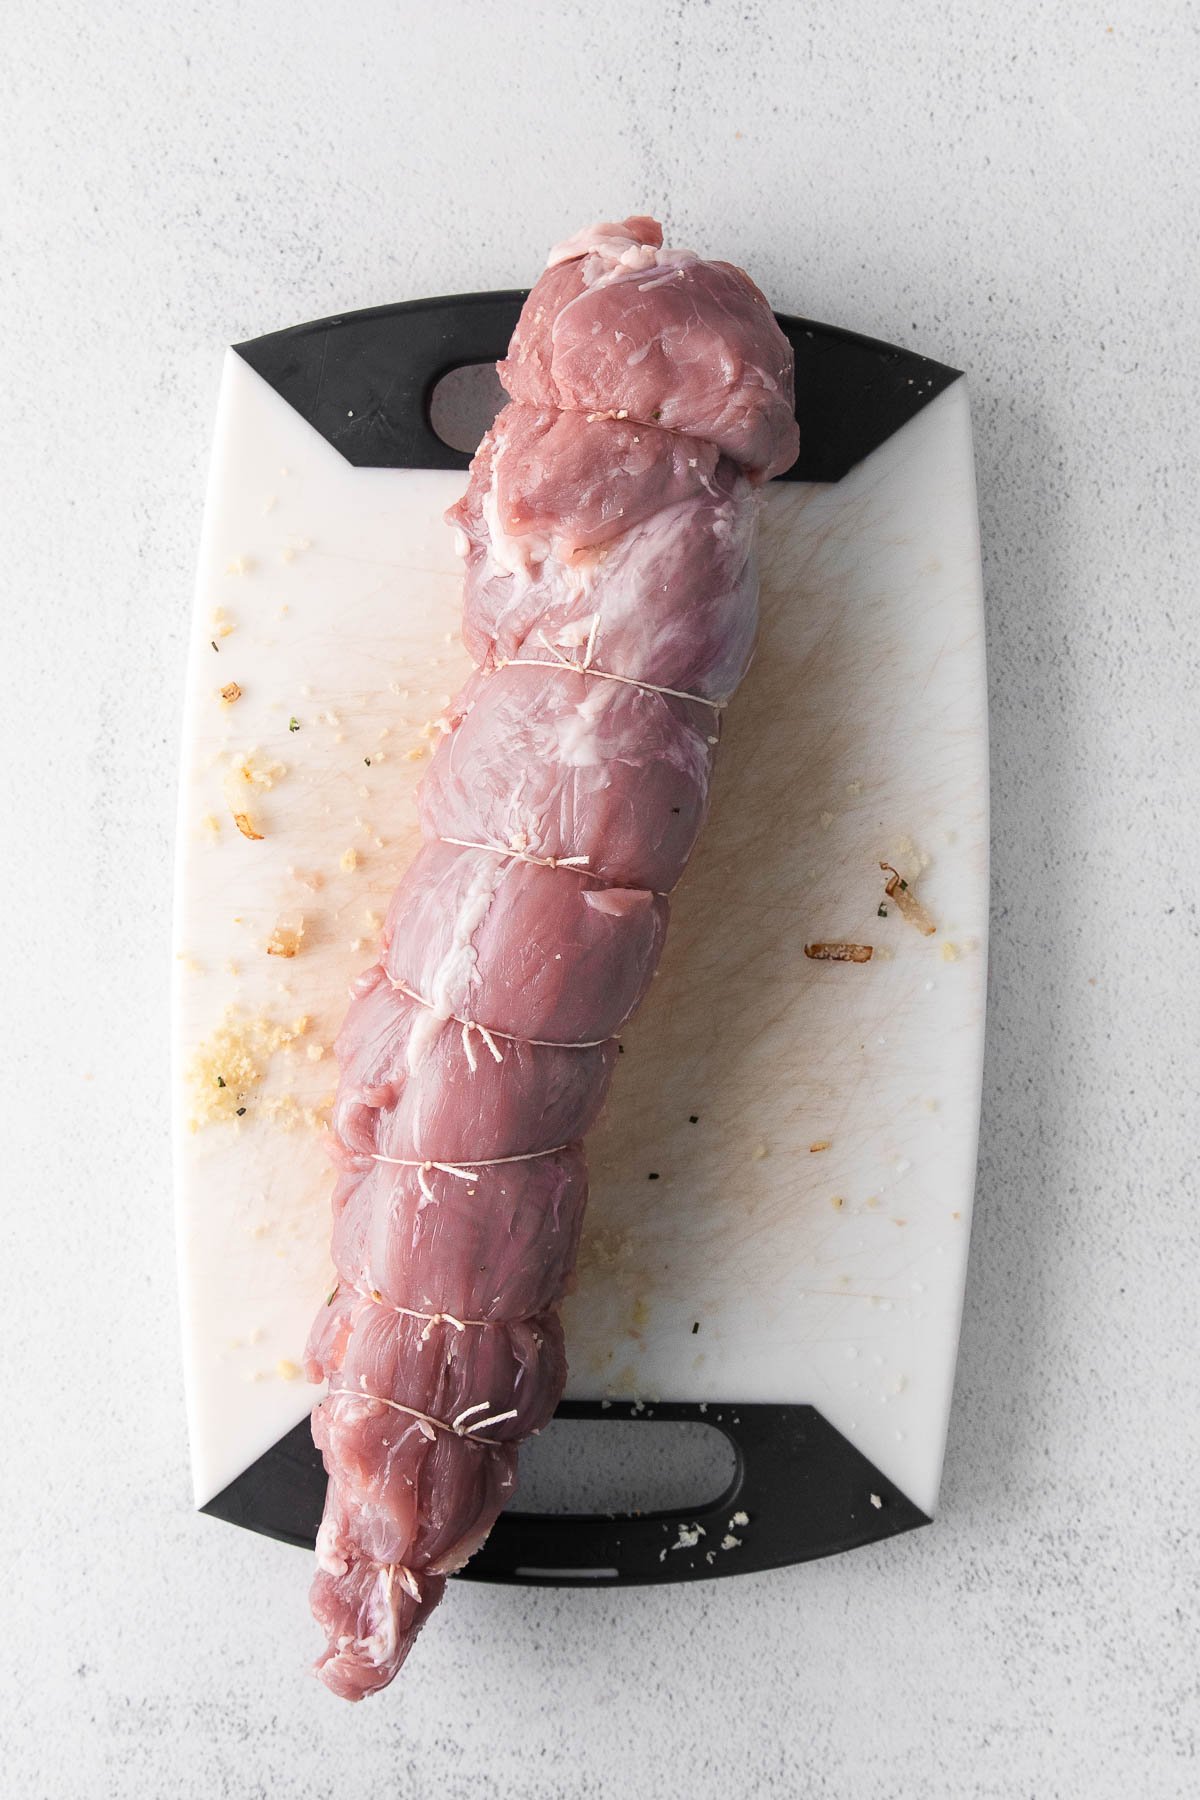 raw pork tenderloin tied with twine on a white cutting board